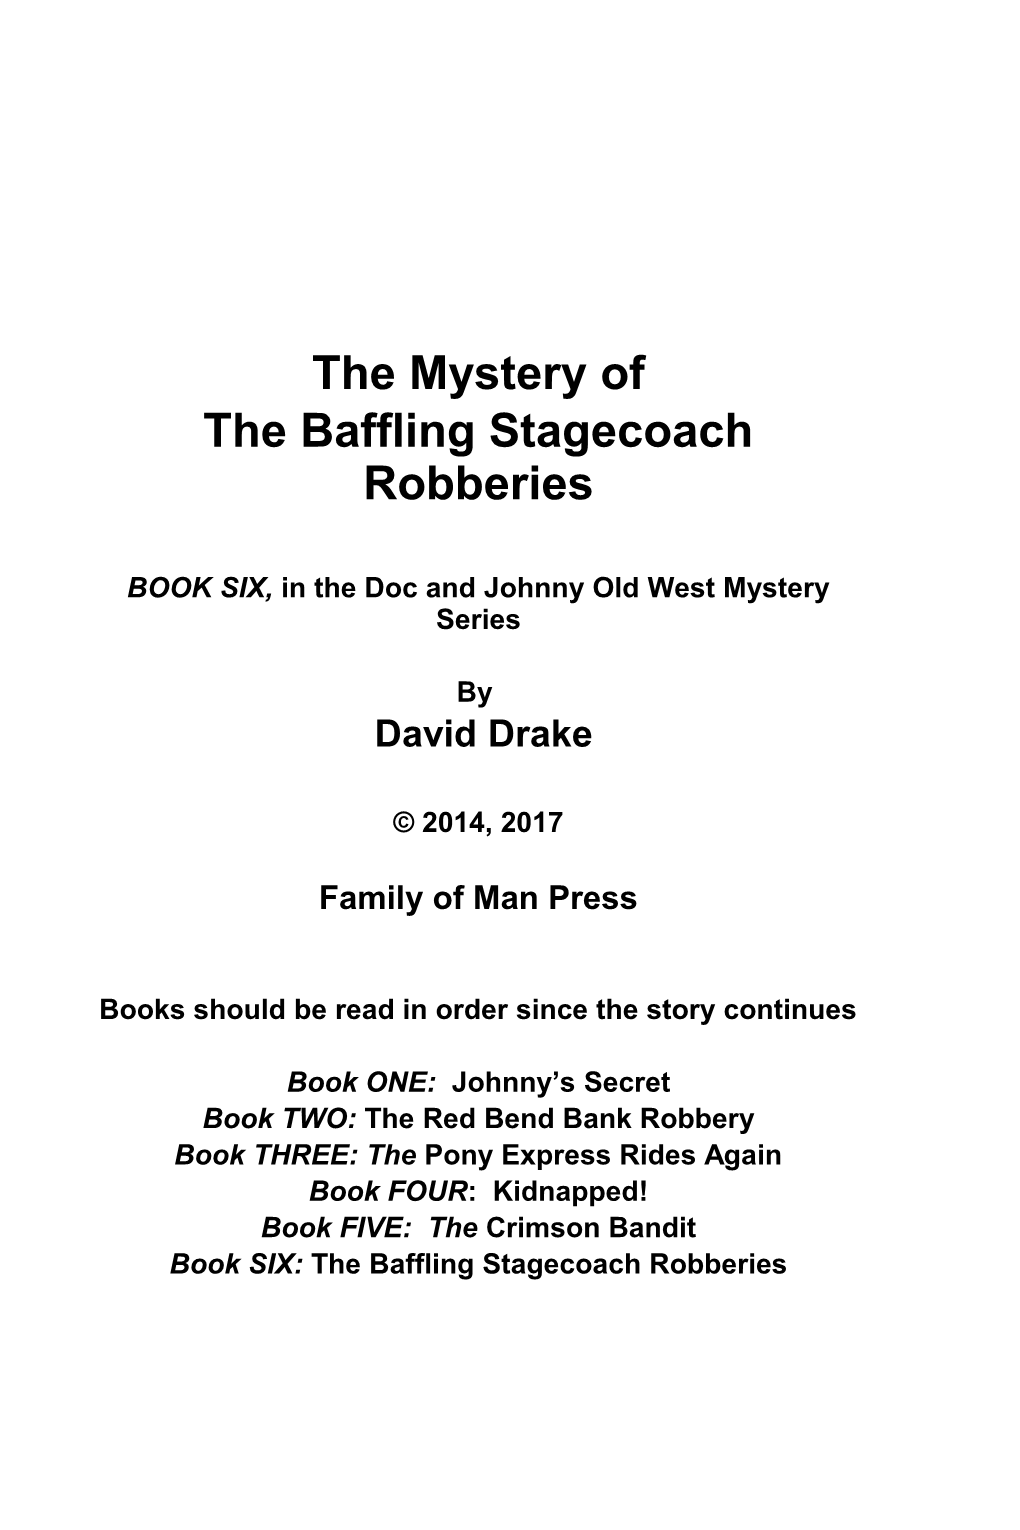 BOOK SIX, in the Doc and Johnny Old West Mystery Series